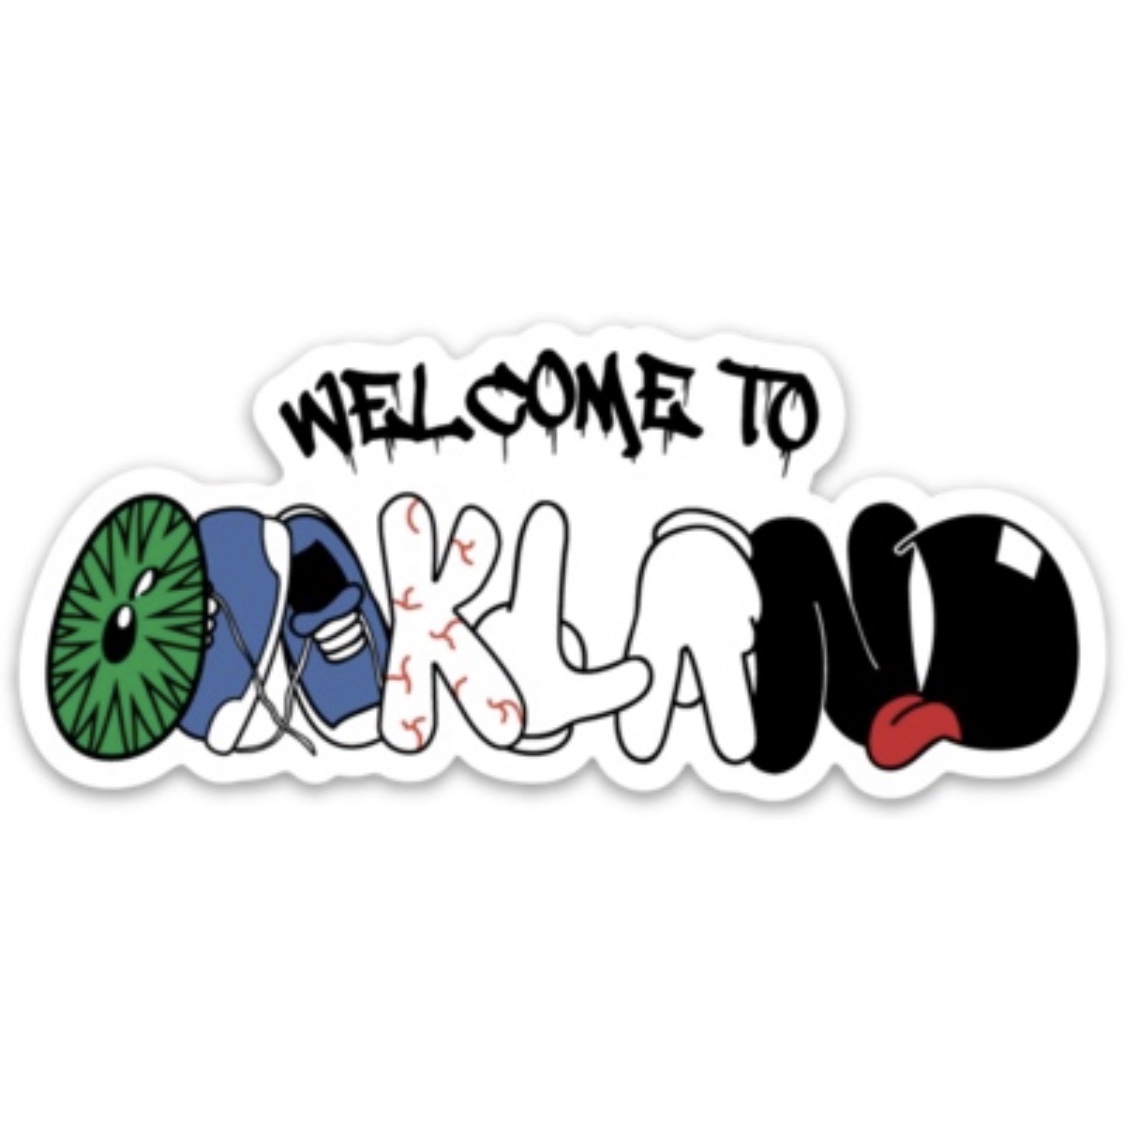 Welcome to Oakland by Eric Miles Williamson